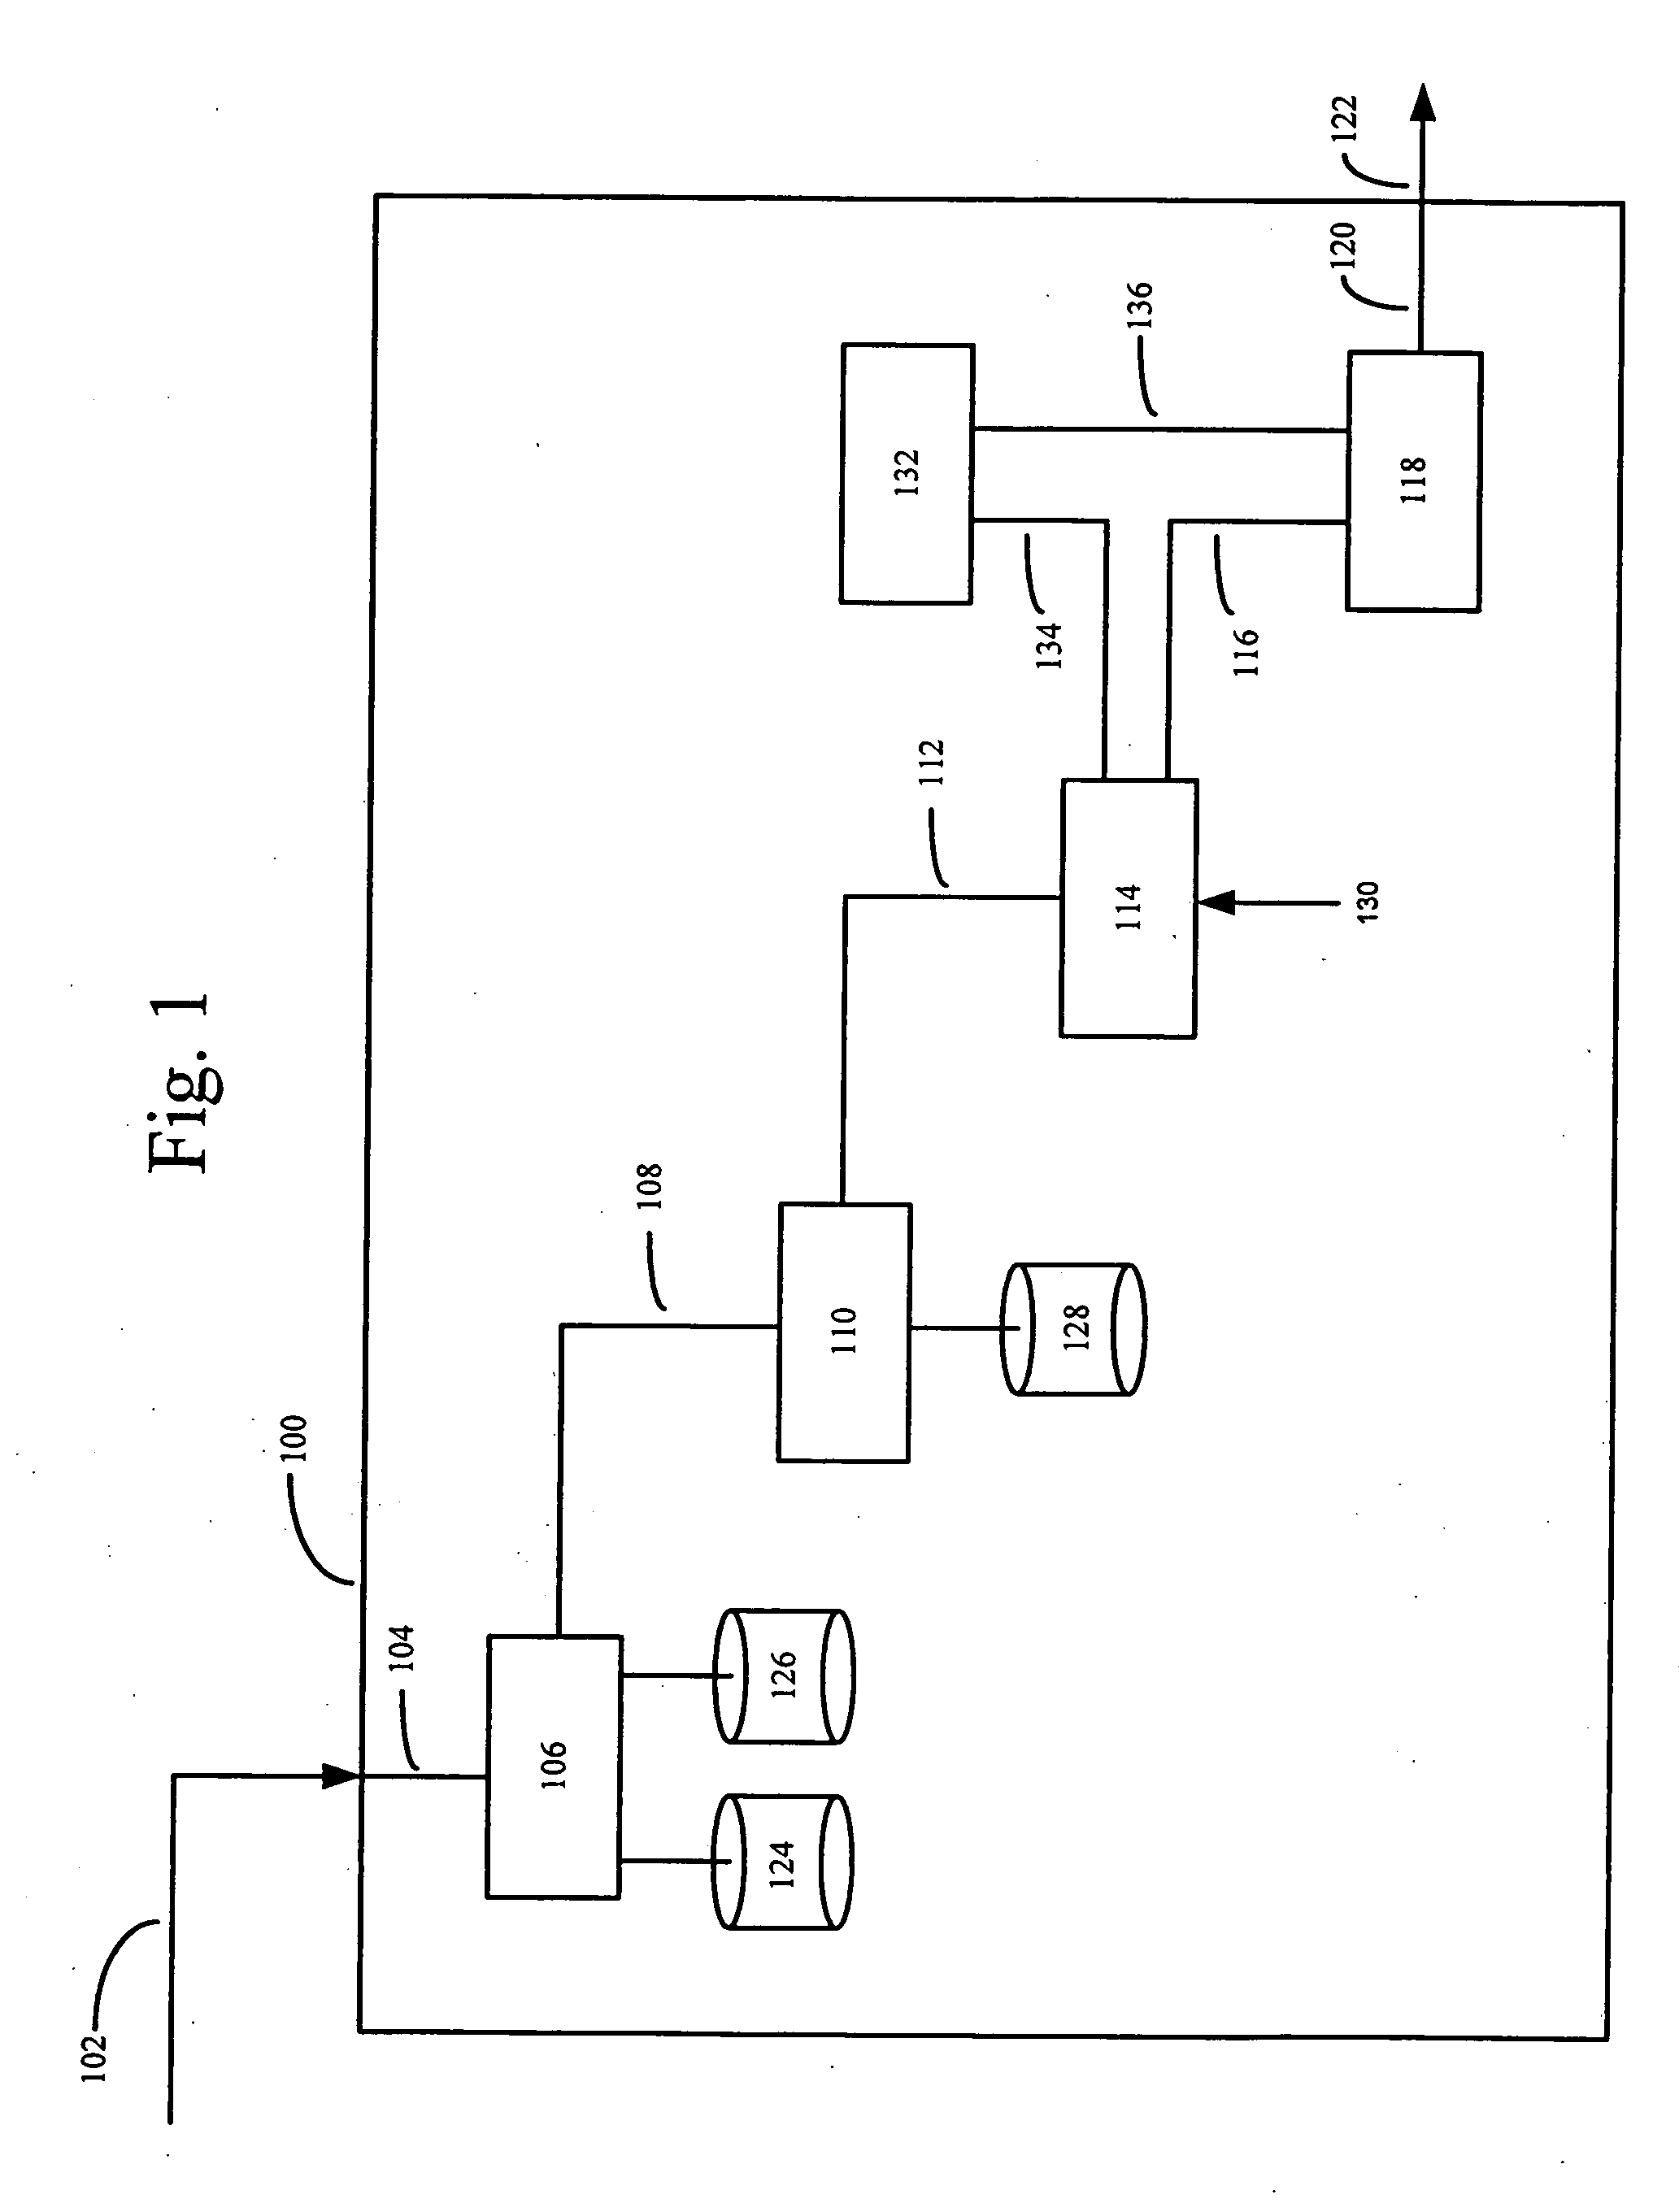 System and method for geo-coding using spatial geometry